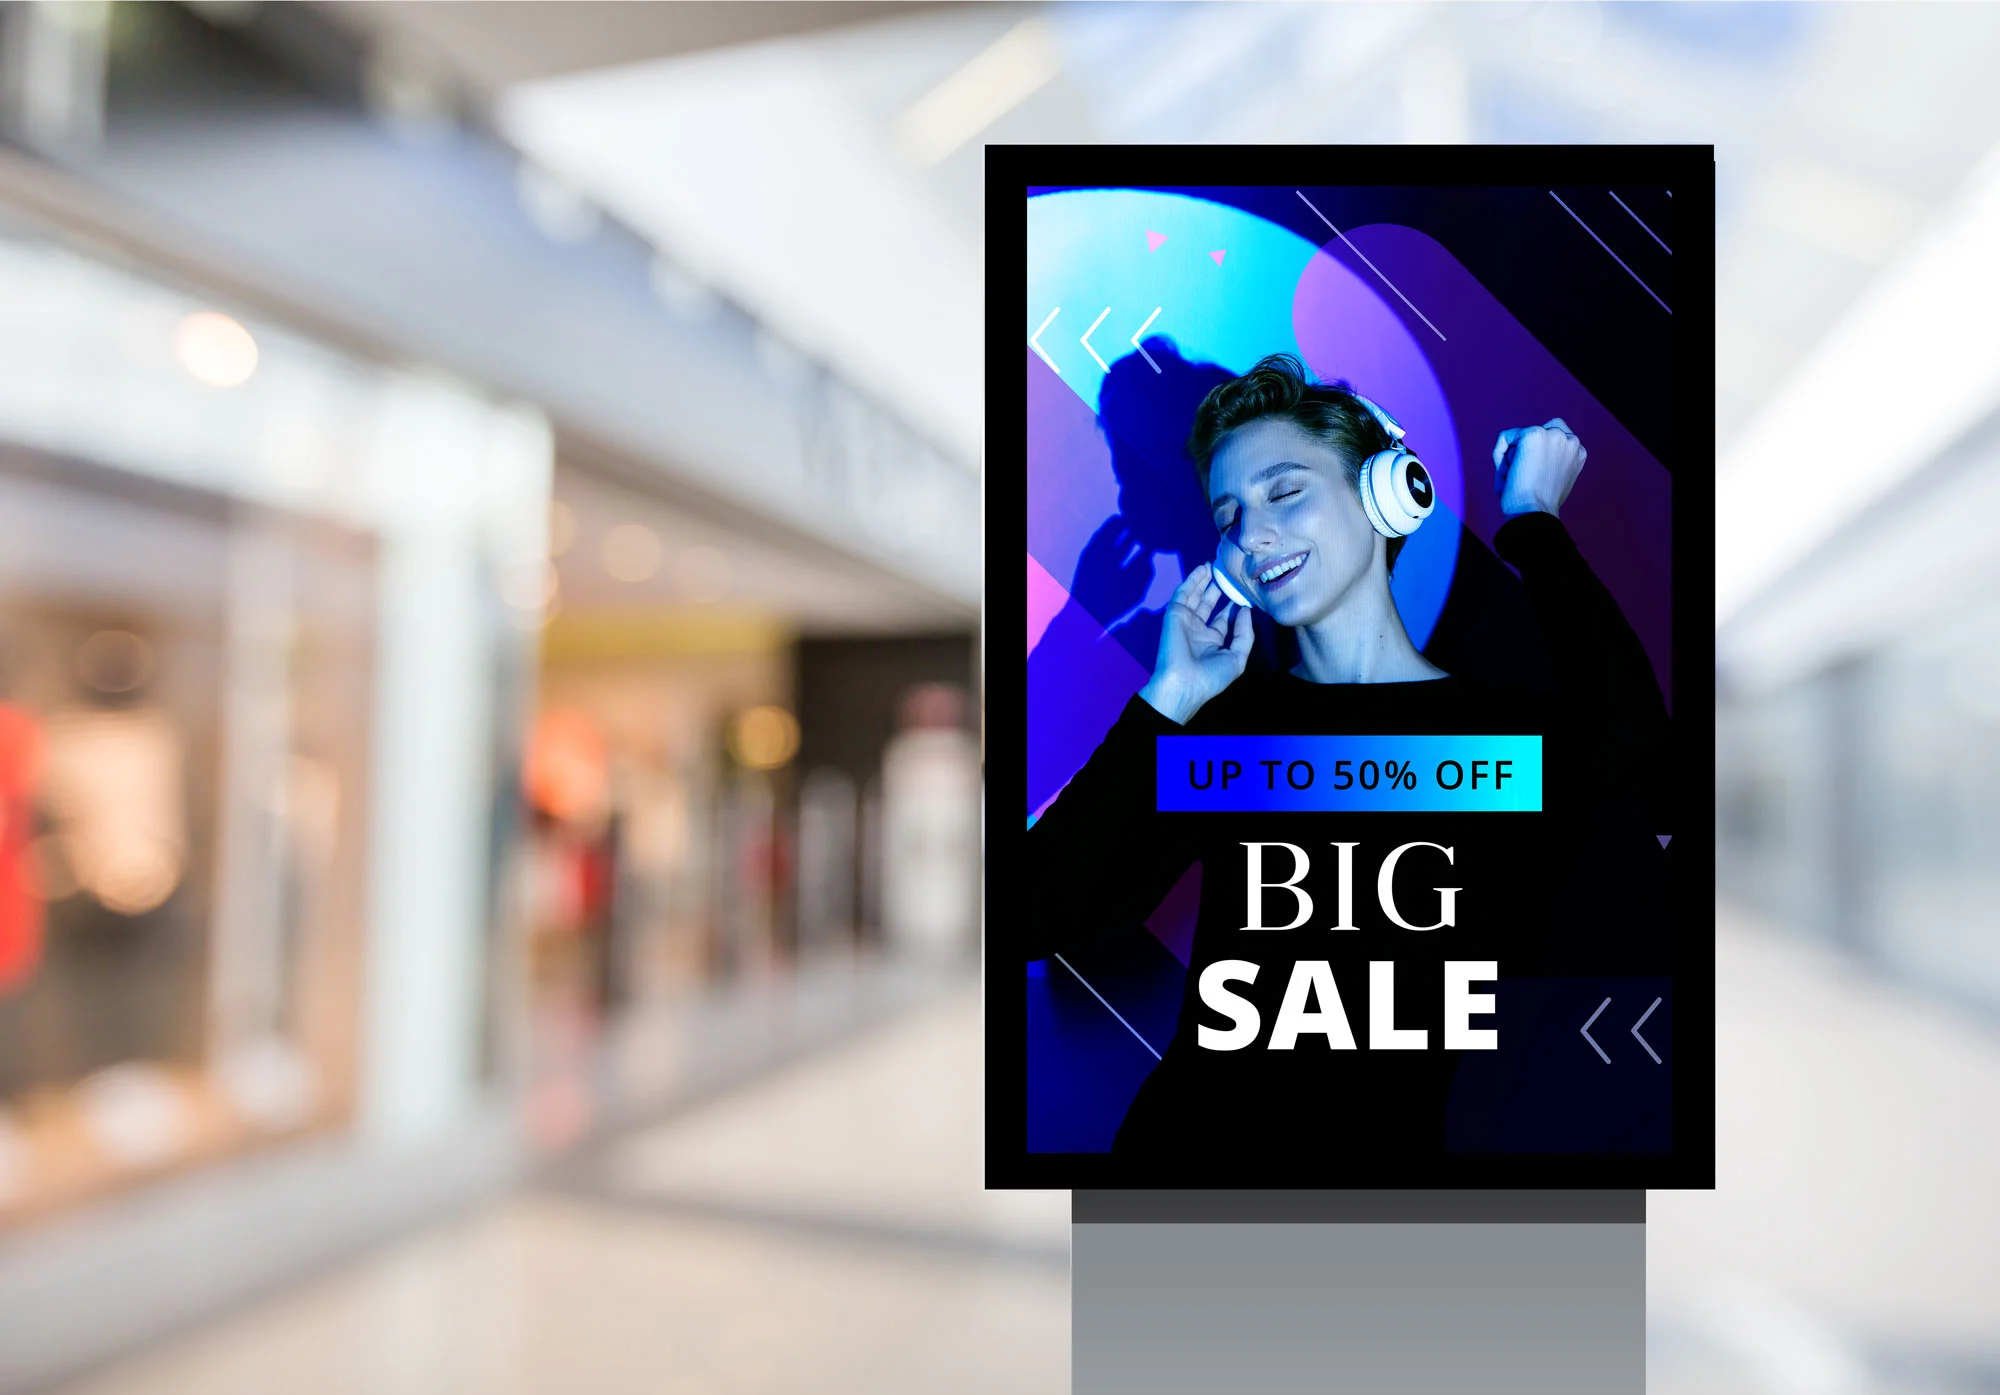 Key features of digital signage software